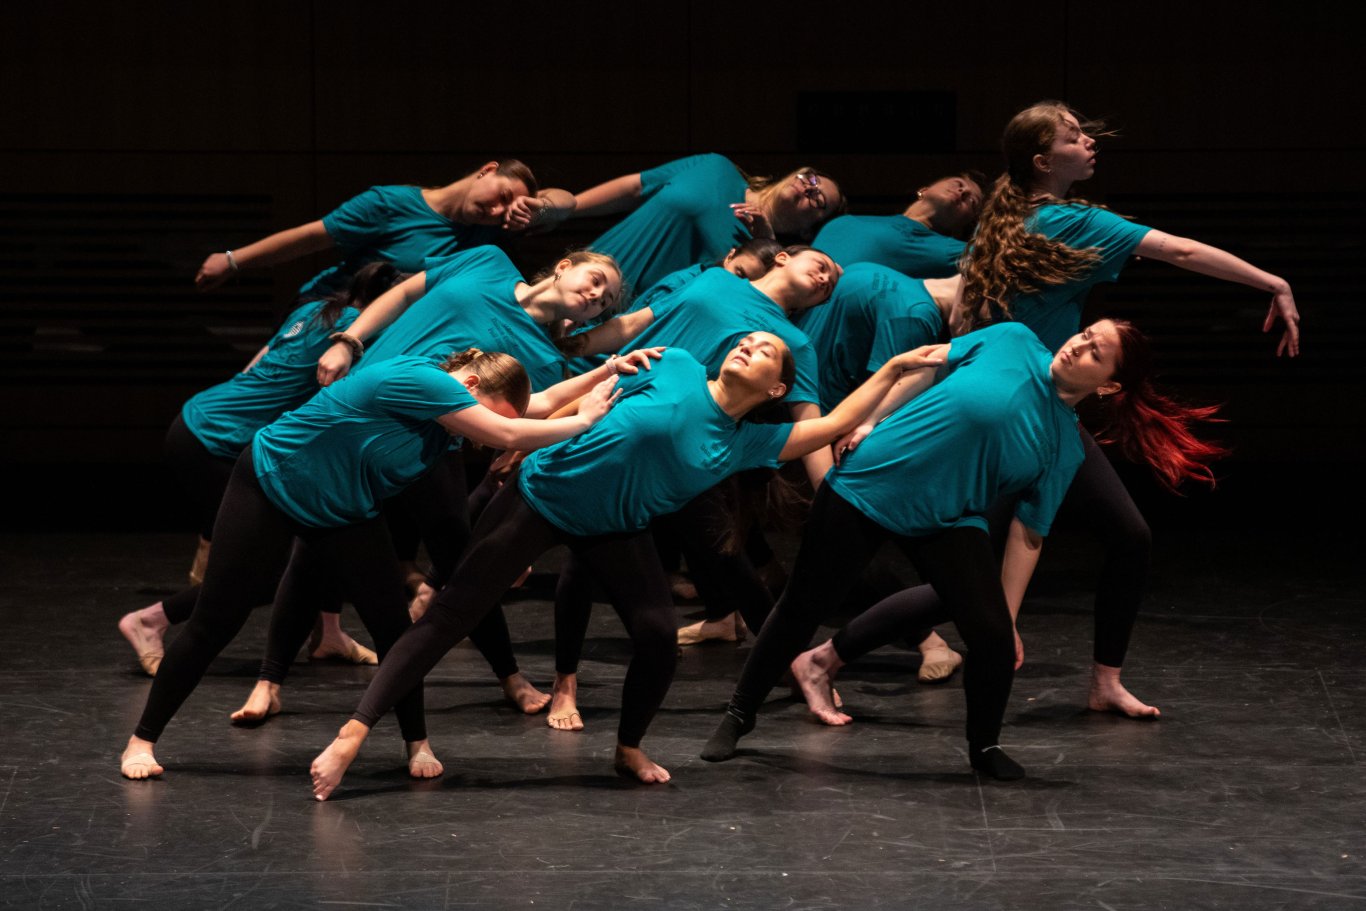 A dance troupe in matching costumes dances on stage in unison at UAlbany Showcase.